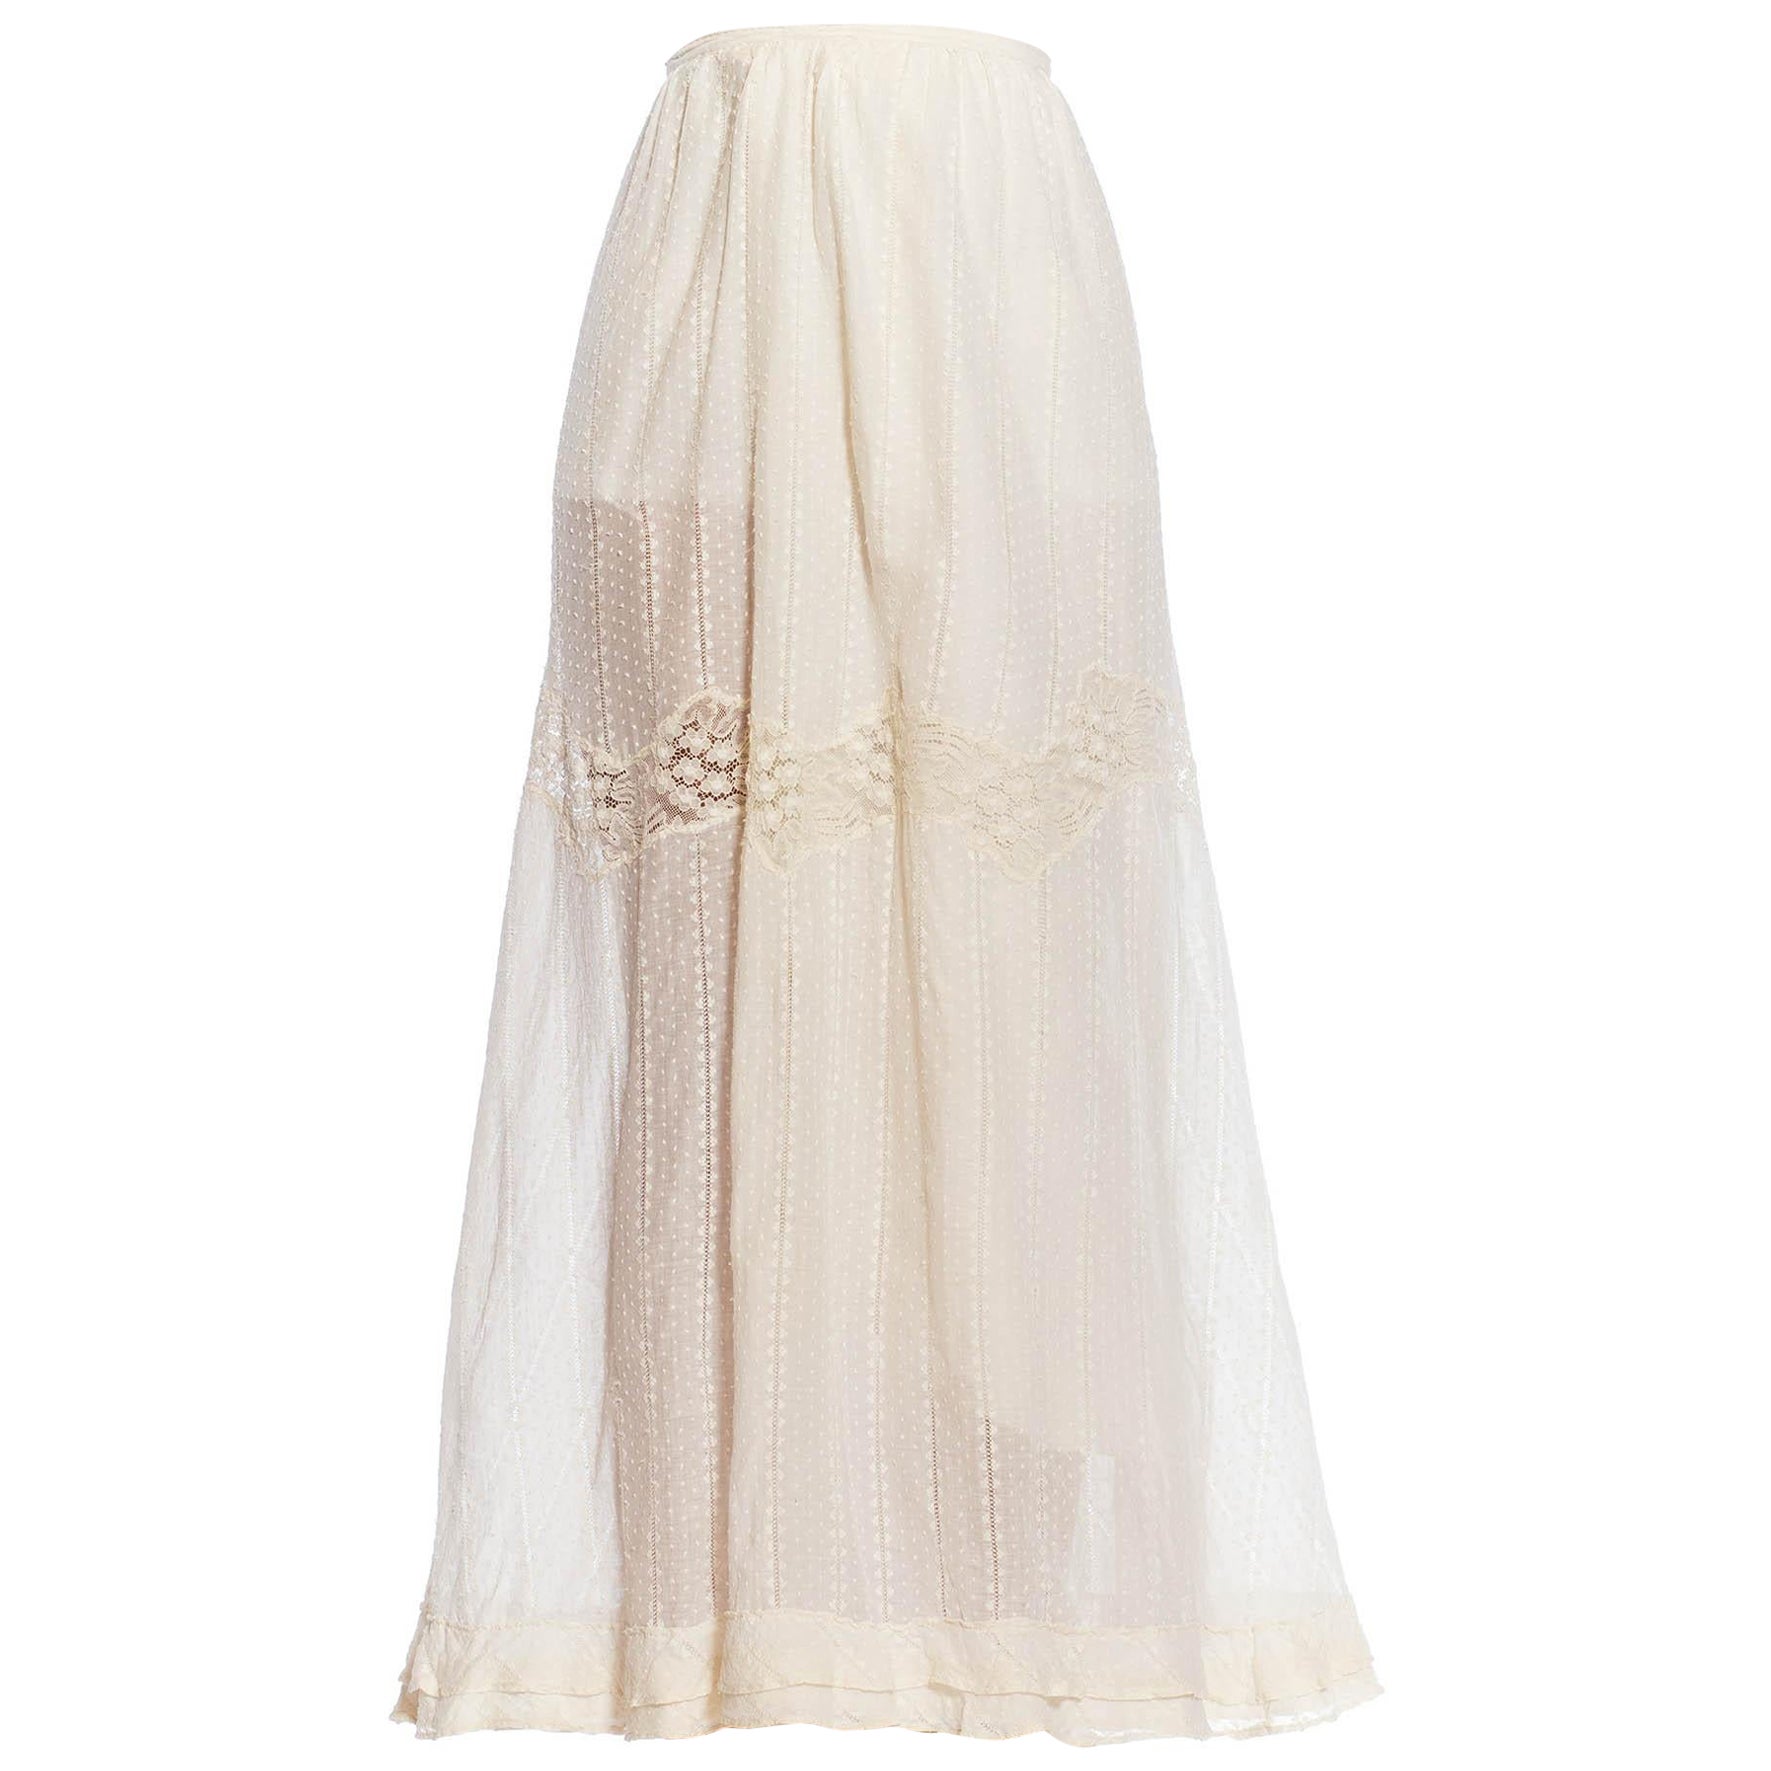 Victorian Ivory Organic Cotton & Lace Trimmed Skirt